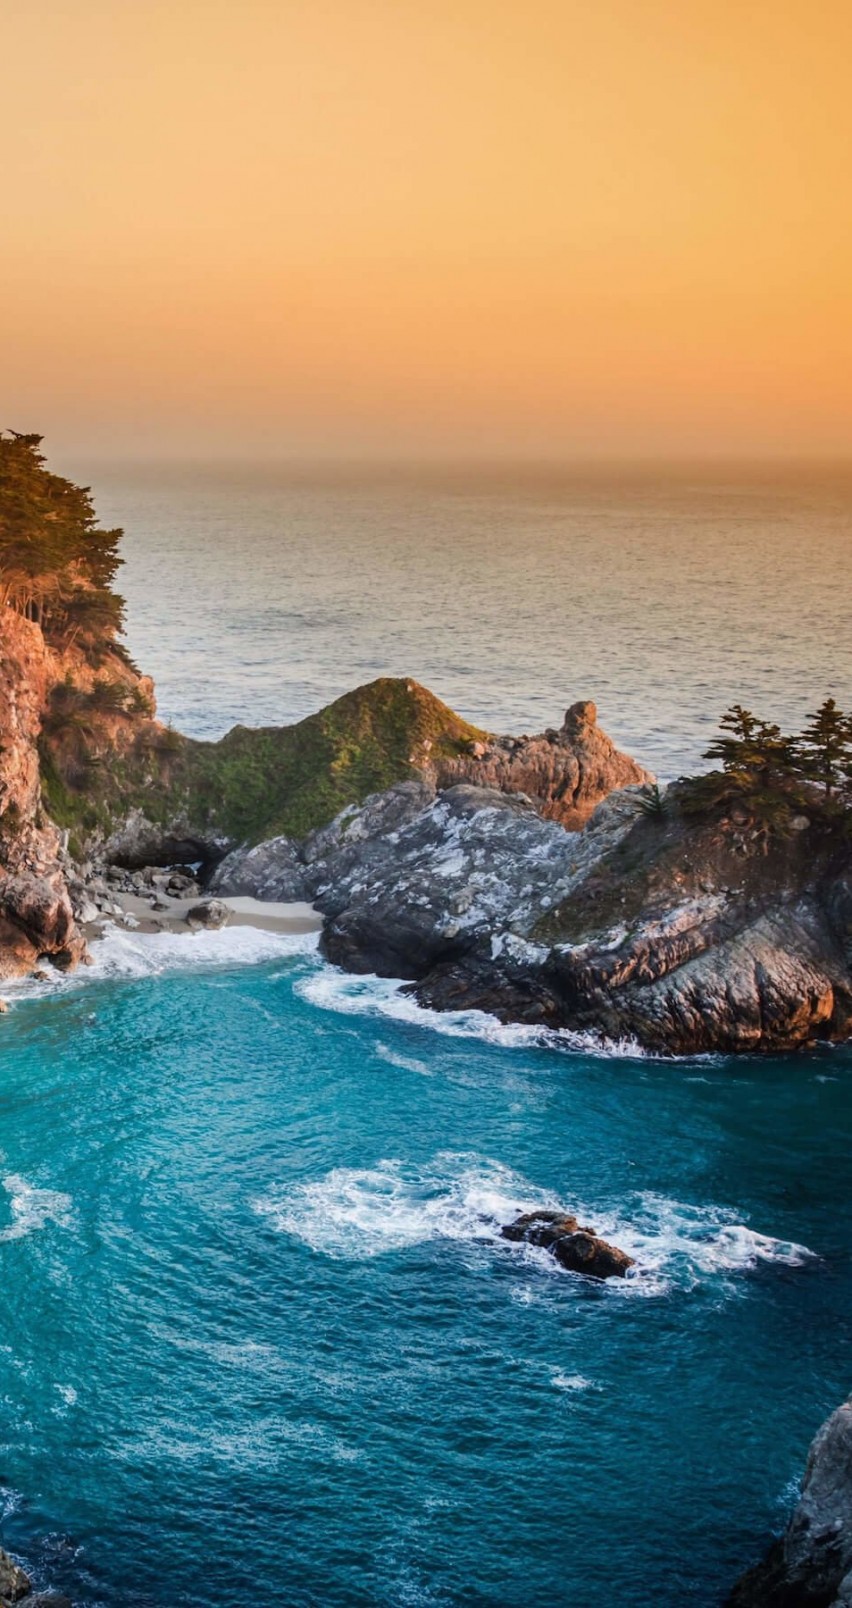 McWay Falls in Big Sur, California, USA Wallpaper for Apple iPhone 6 / 6s